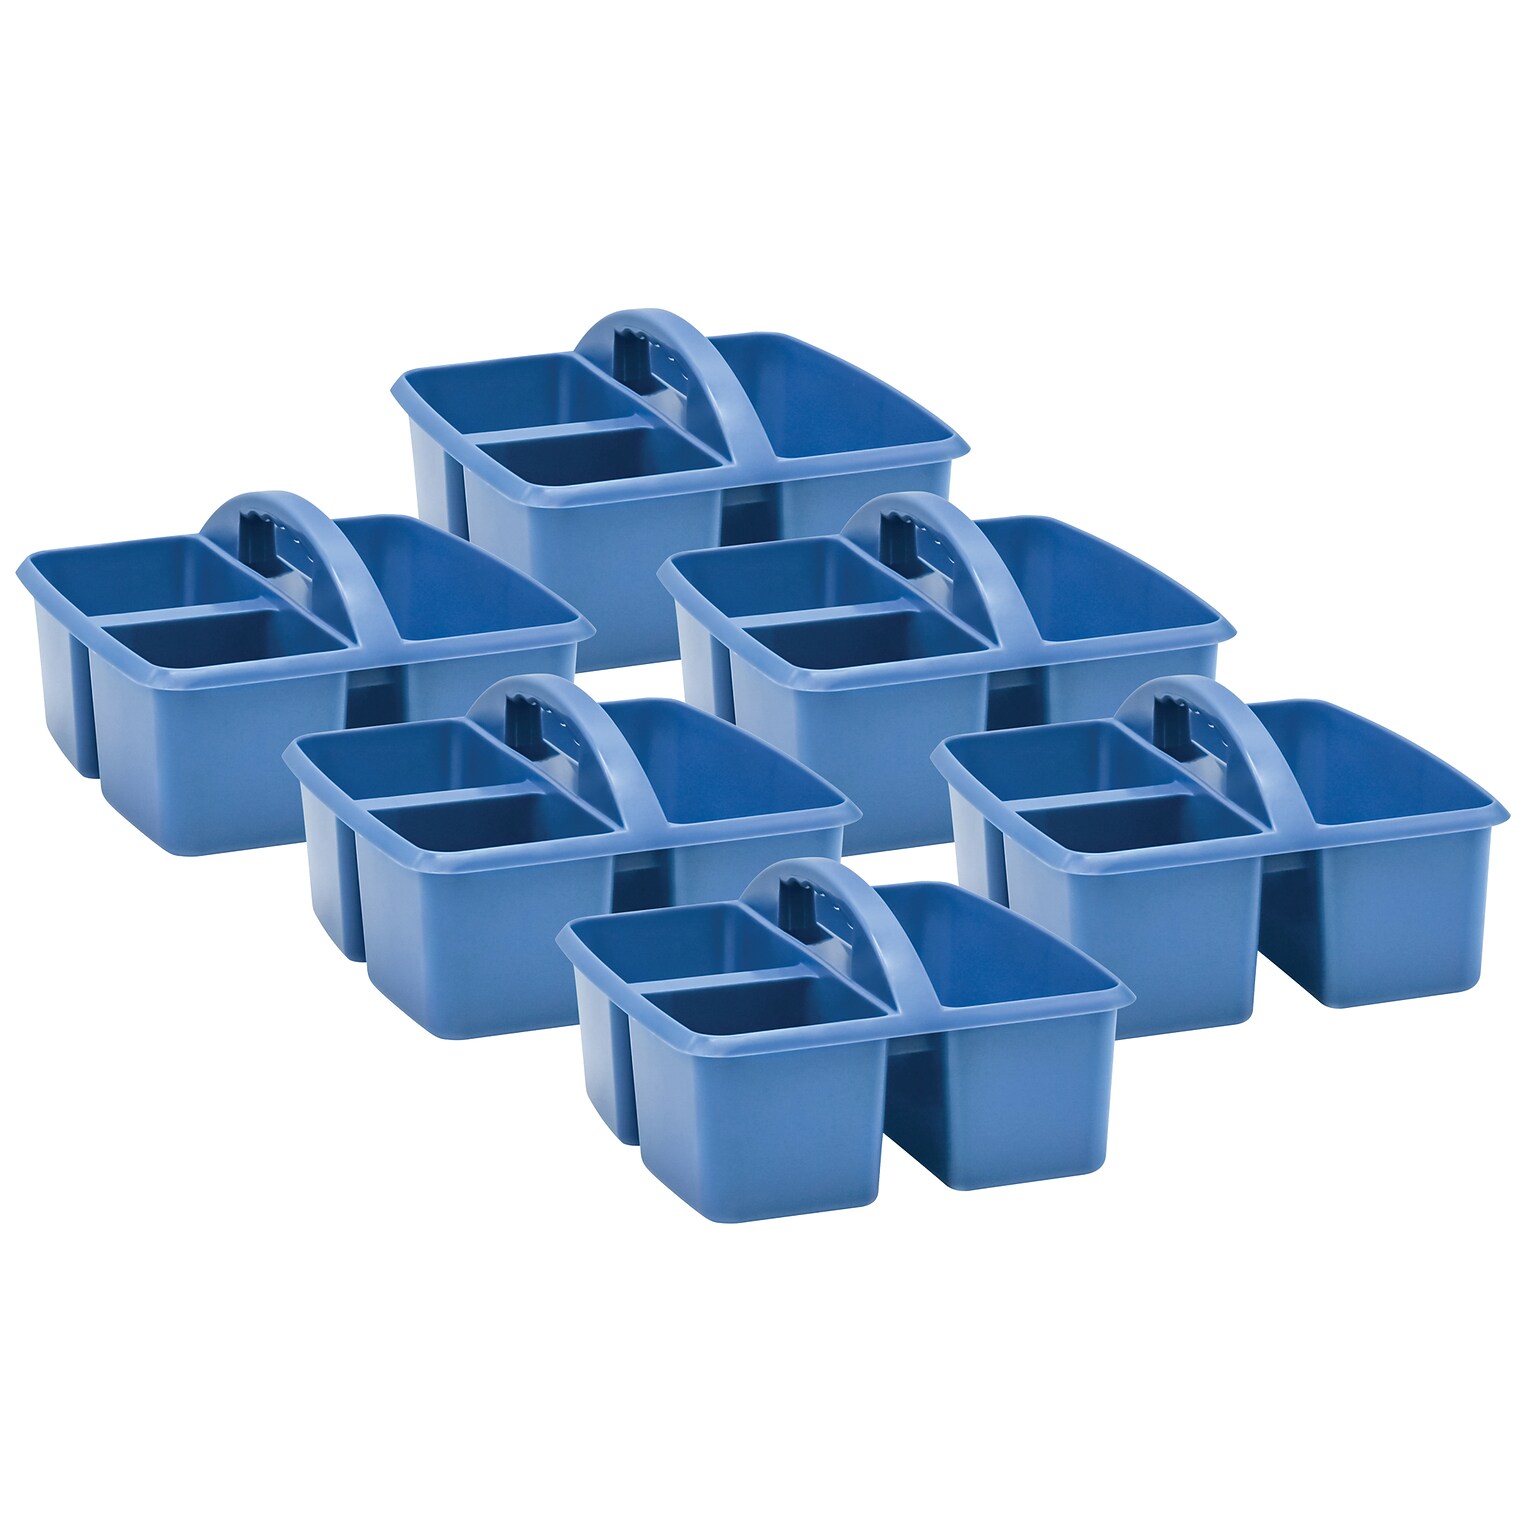 Teacher Created Resources® Plastic Storage Caddy, 9 x 9.25 x 5.25, Slate Blue, Pack of 6 (TCR20443-6)